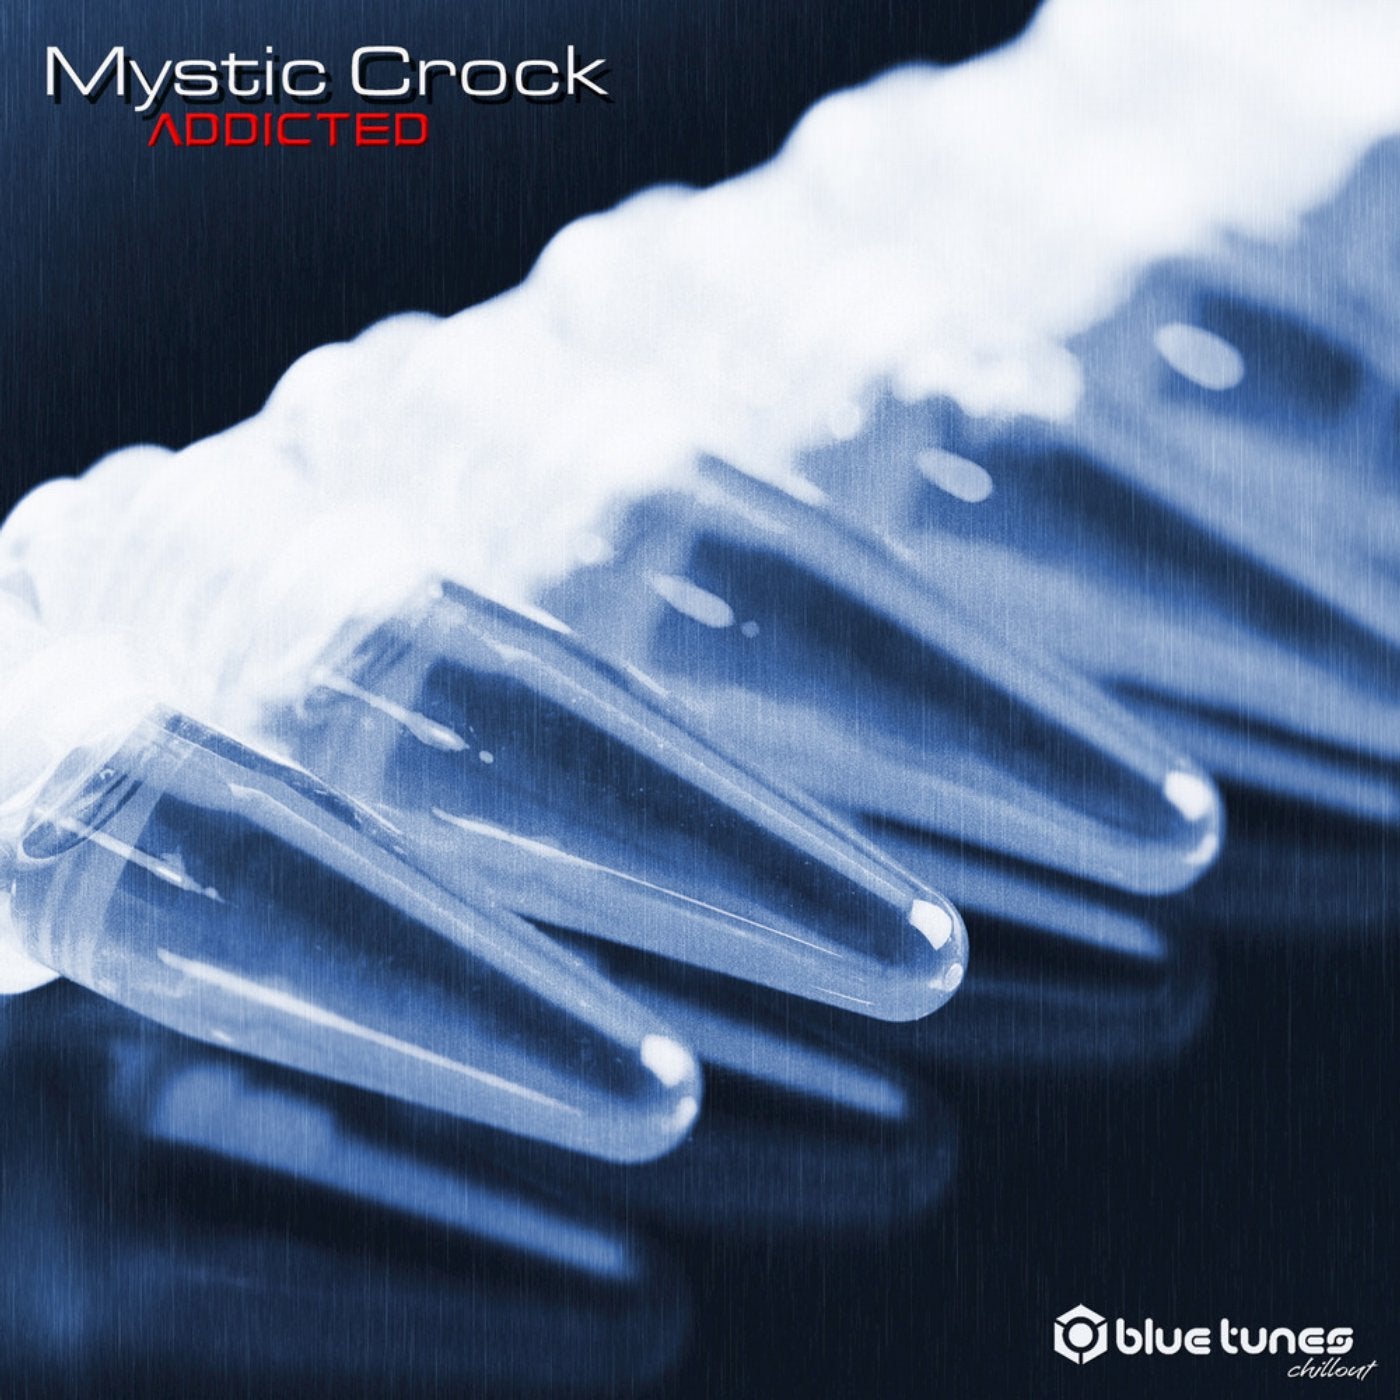 Mystic crock. Mystic Crock dense. Mystic Crock Temting Abyss fourth Dimension Remix mp3.